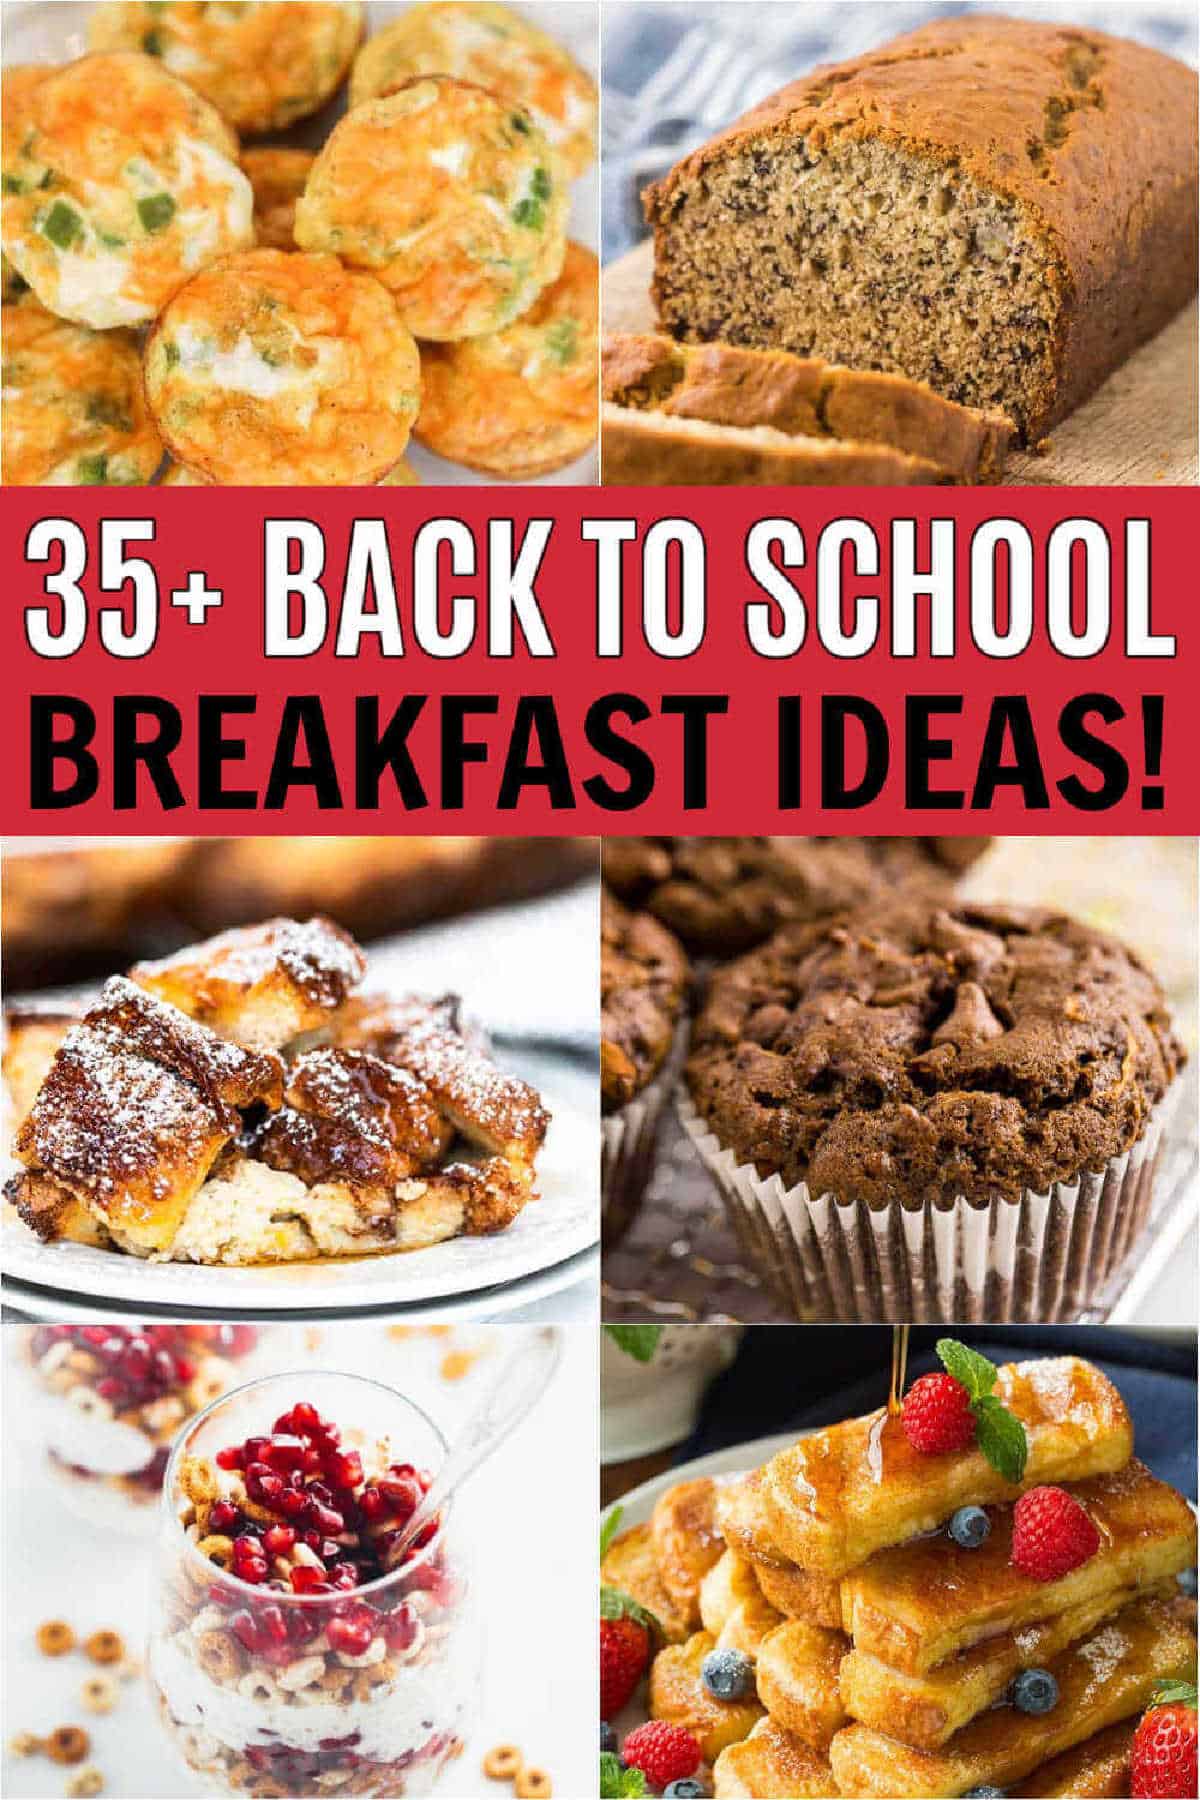 18 Breakfast Baking Recipes to Make Your Mornings Toasty